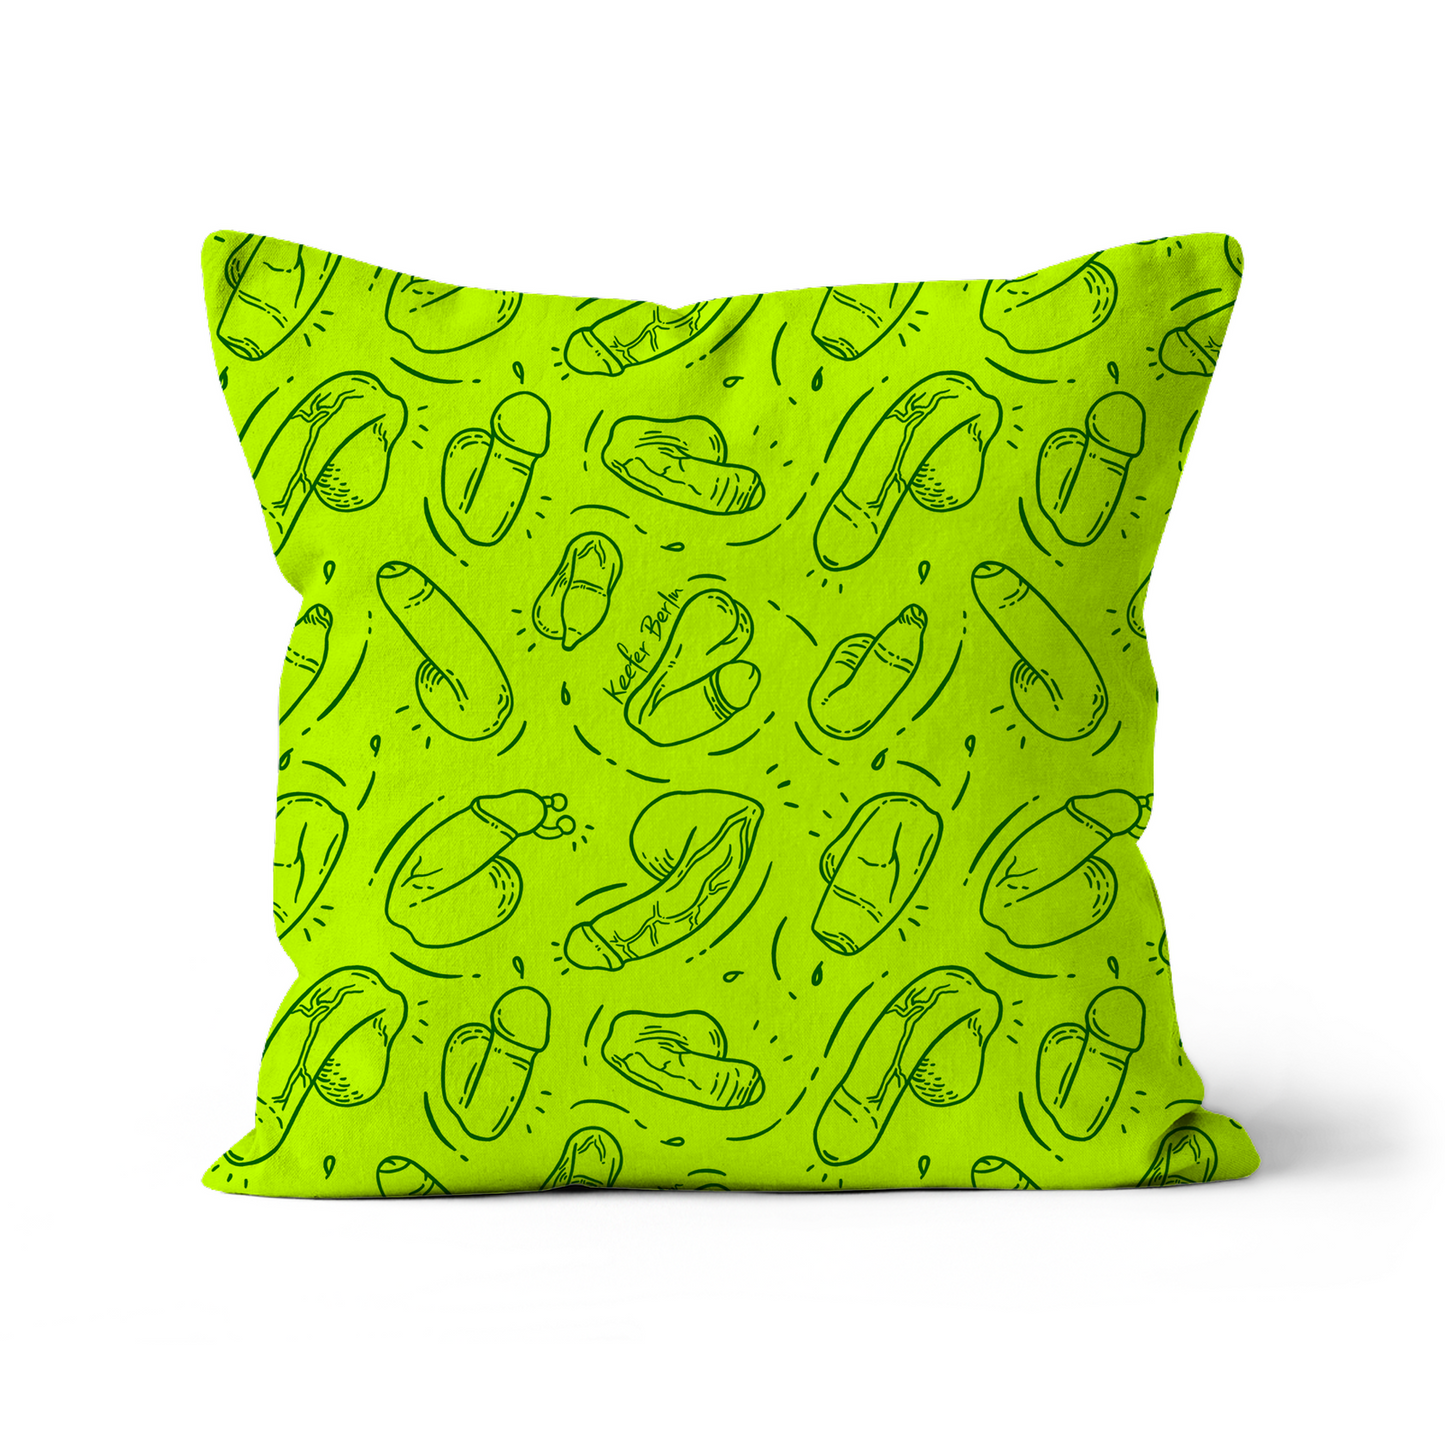 Dicklious (Neon Green Edition) Throw Pillow With Insert